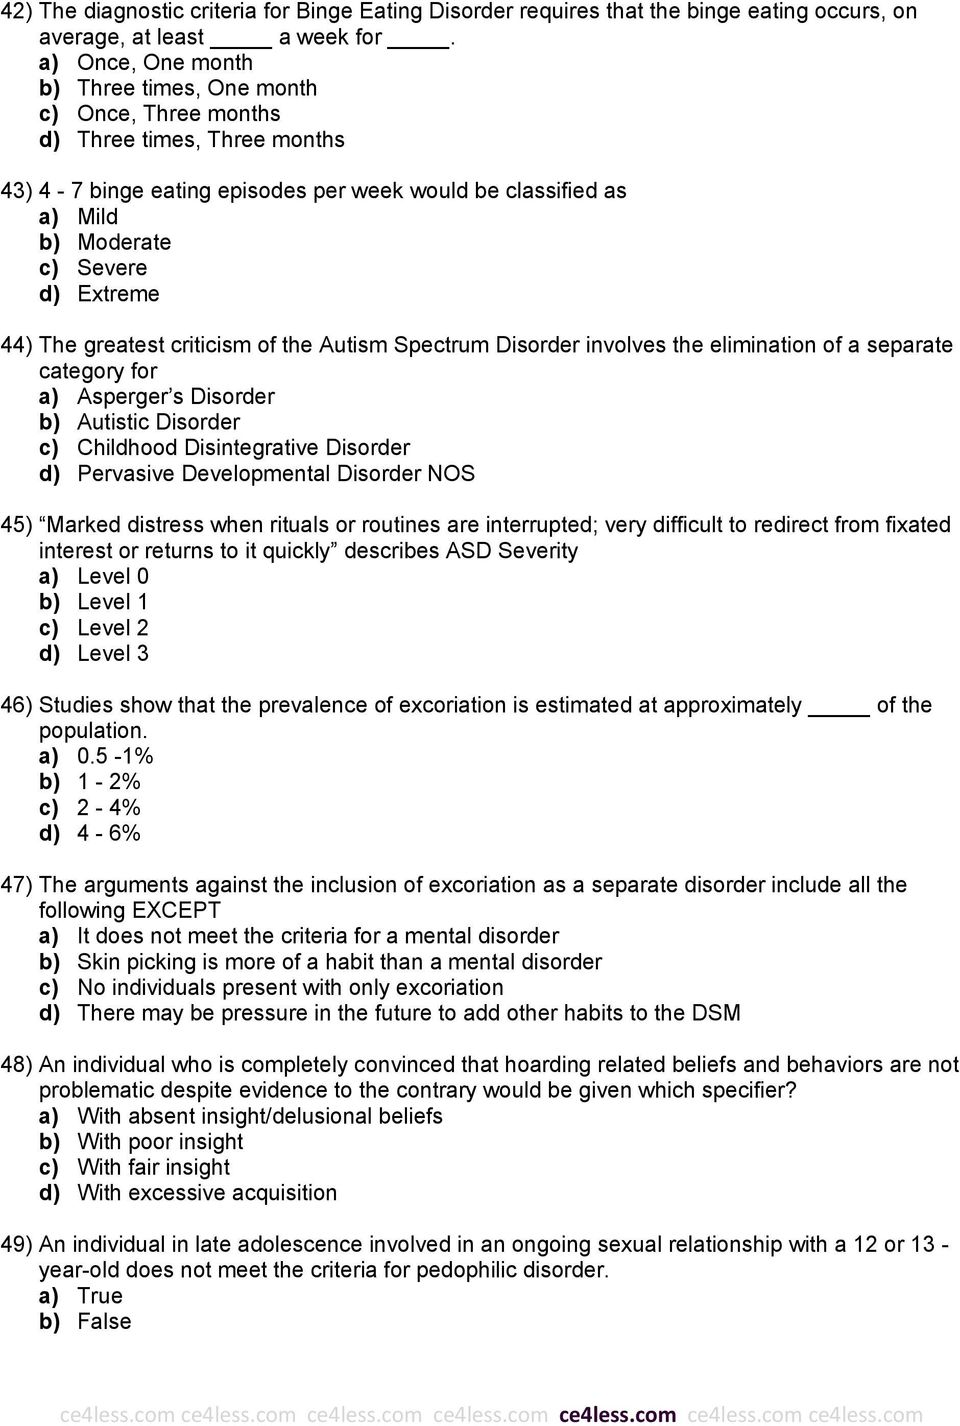 44) The greatest criticism of the Autism Spectrum Disorder involves the elimination of a separate category for a) Asperger s Disorder b) Autistic Disorder c) Childhood Disintegrative Disorder d)